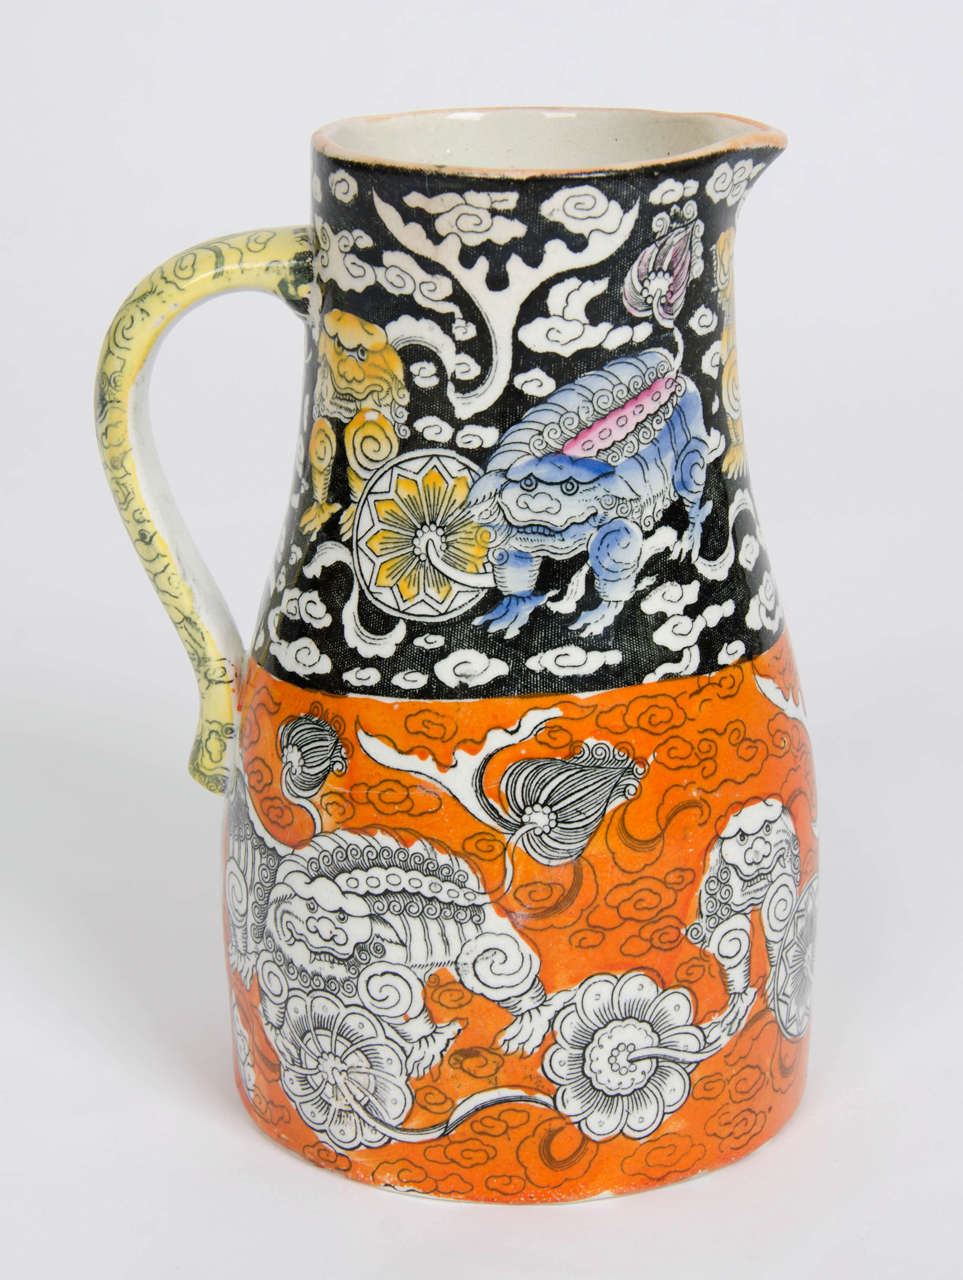 This is a rare shape Jug by Masons Ironstone pottery 

The Jug is decorated with the chinoiserie influenced 